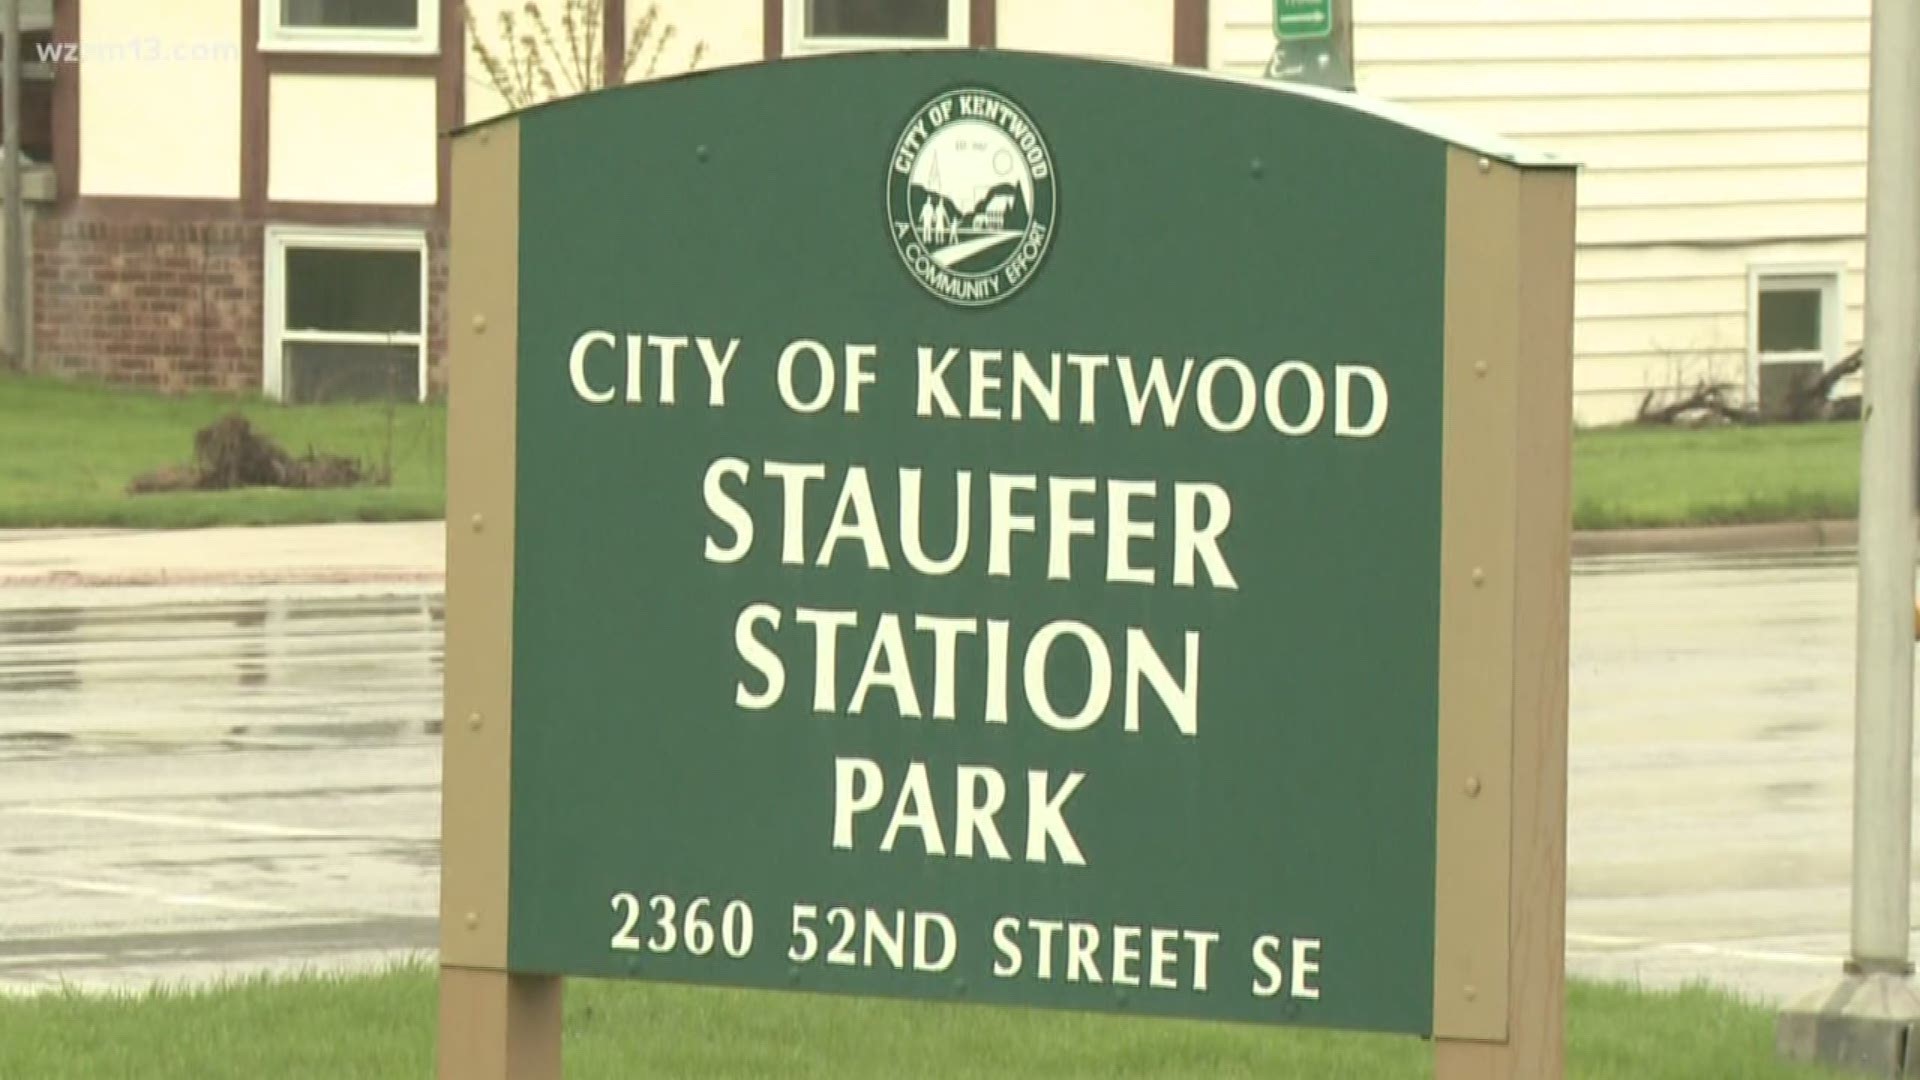 Kentwood's mayor Stephen Kepley sat down with 13 ON YOUR SIDE to talk about education, parks and Kentwood's growth as well as to look ahead to what the future holds for the city.